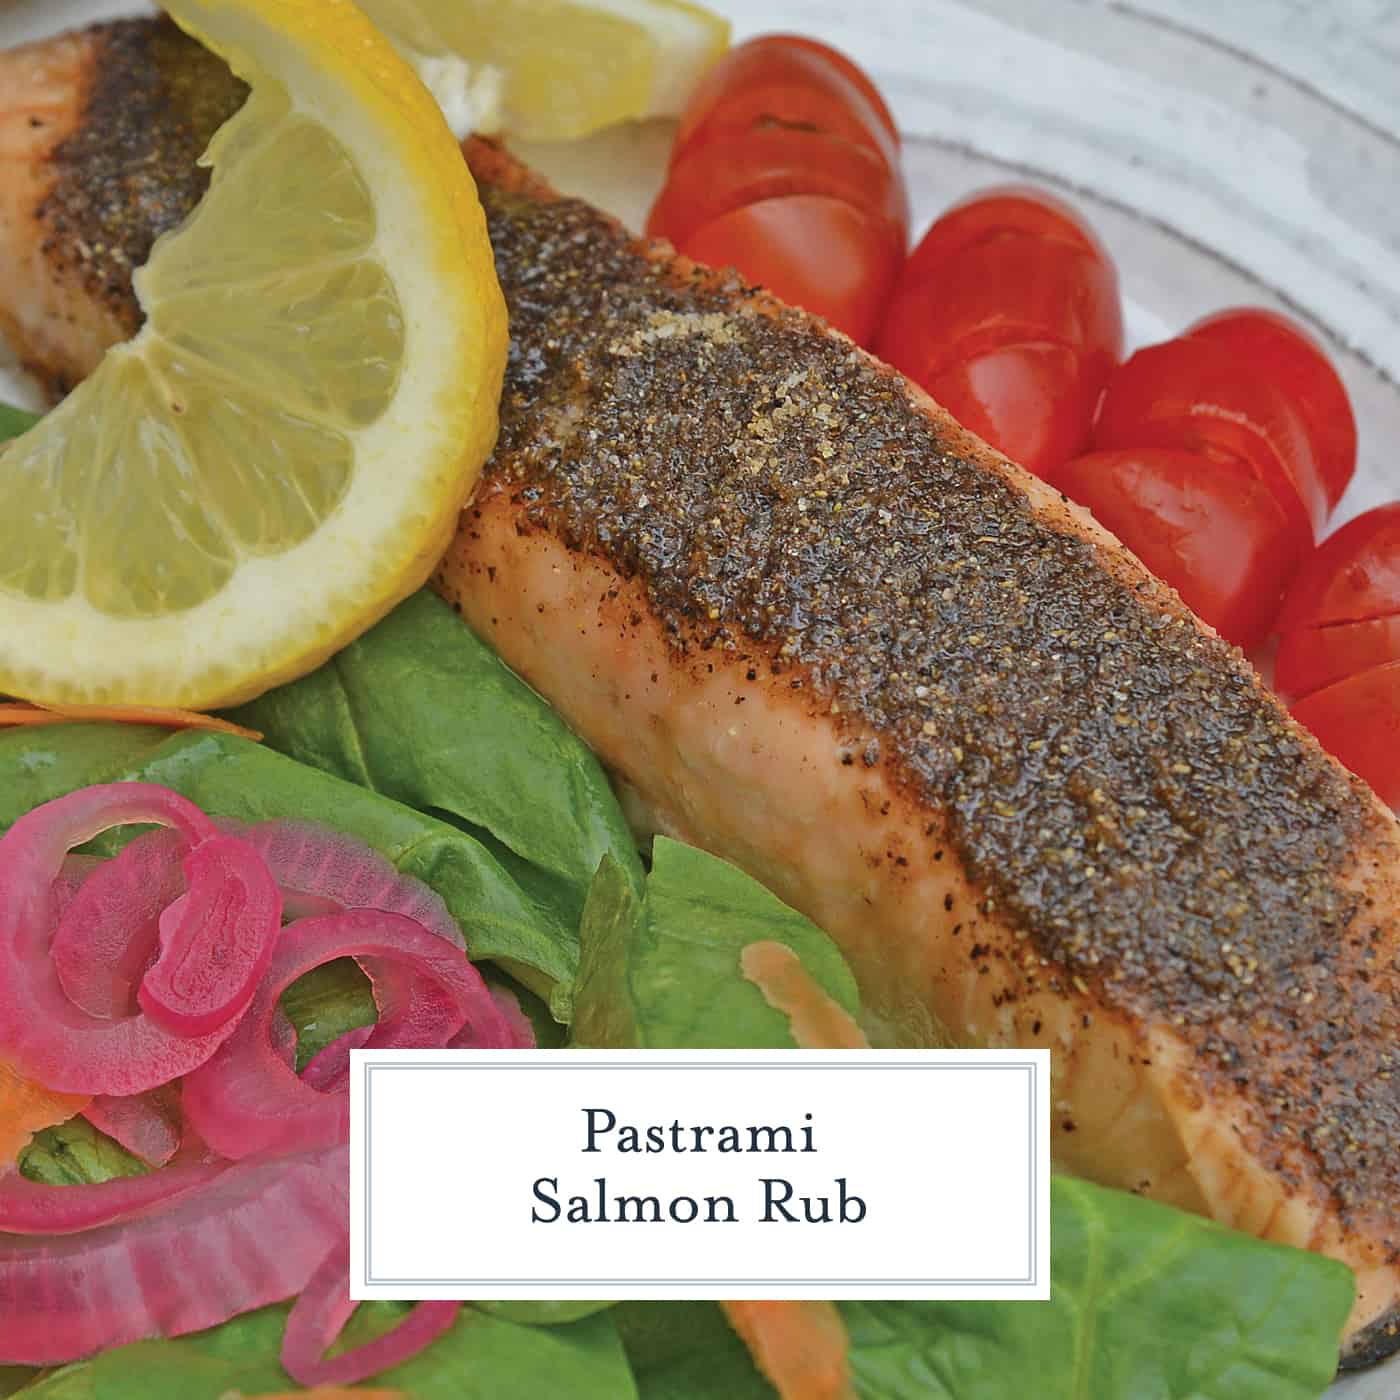 Pastrami Salmon Rub is a blend of the perfect salmon seasoning! Not only for baked salmon, this rub also work for grilled salmon and salmon kabobs! #salmonrub #bakedsalmon #pastramirub www.savoryexperiments.com